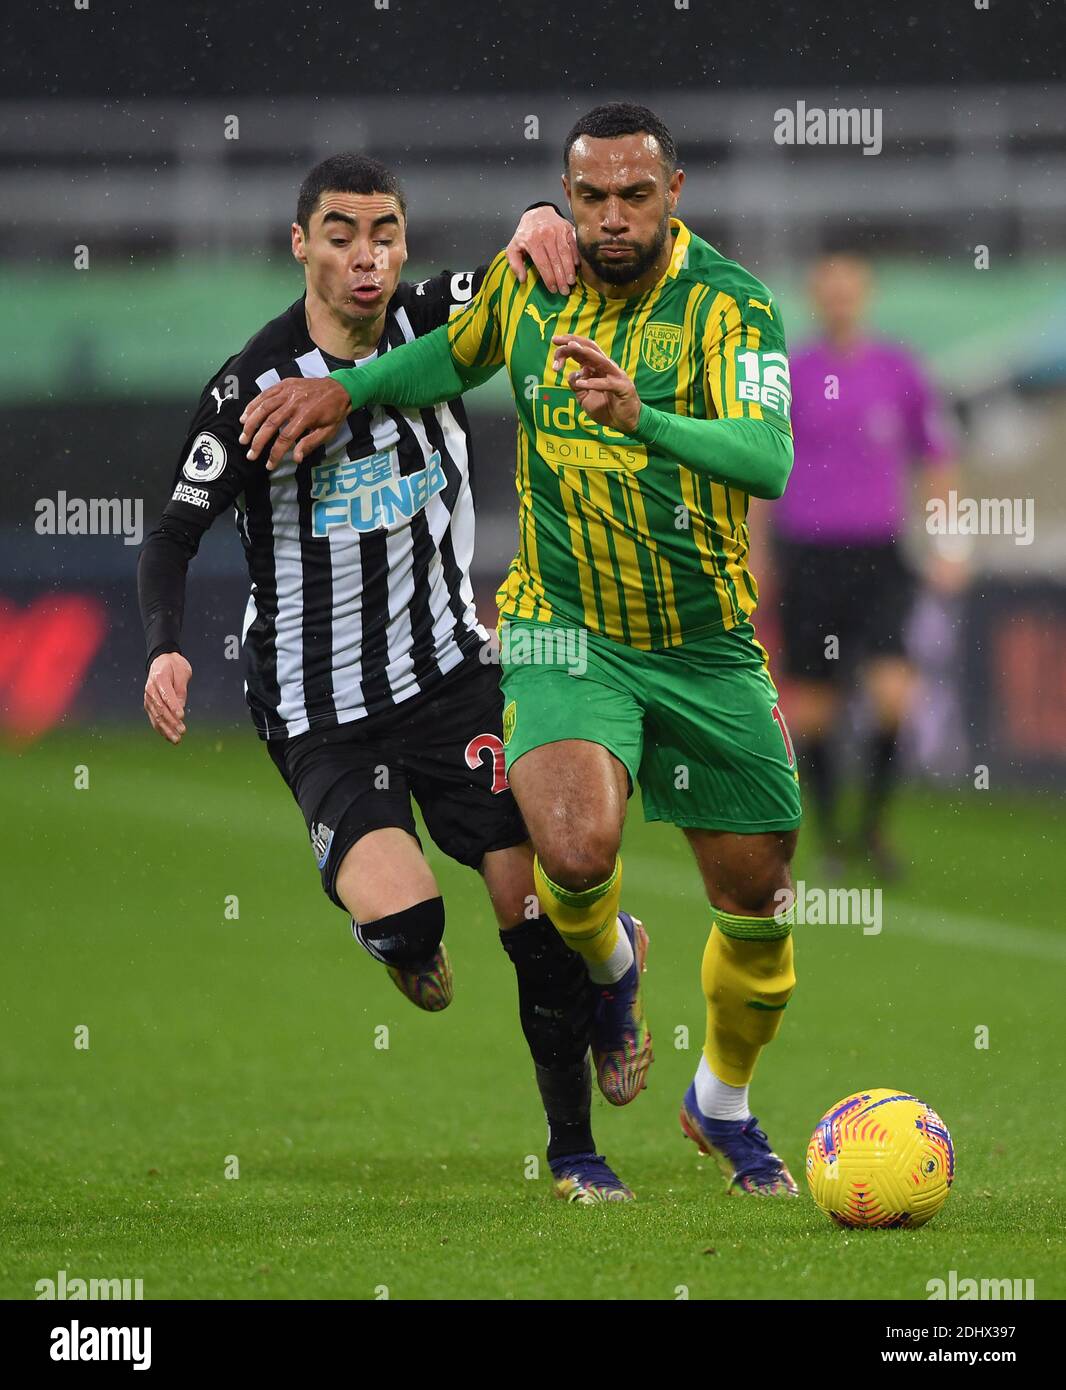 Newcastle United's Miguel Almiron (left) and West Bromwich Albion's Matt Phillips battle for the ball during the Premier League match at St James' Park, Newcastle. Stock Photo